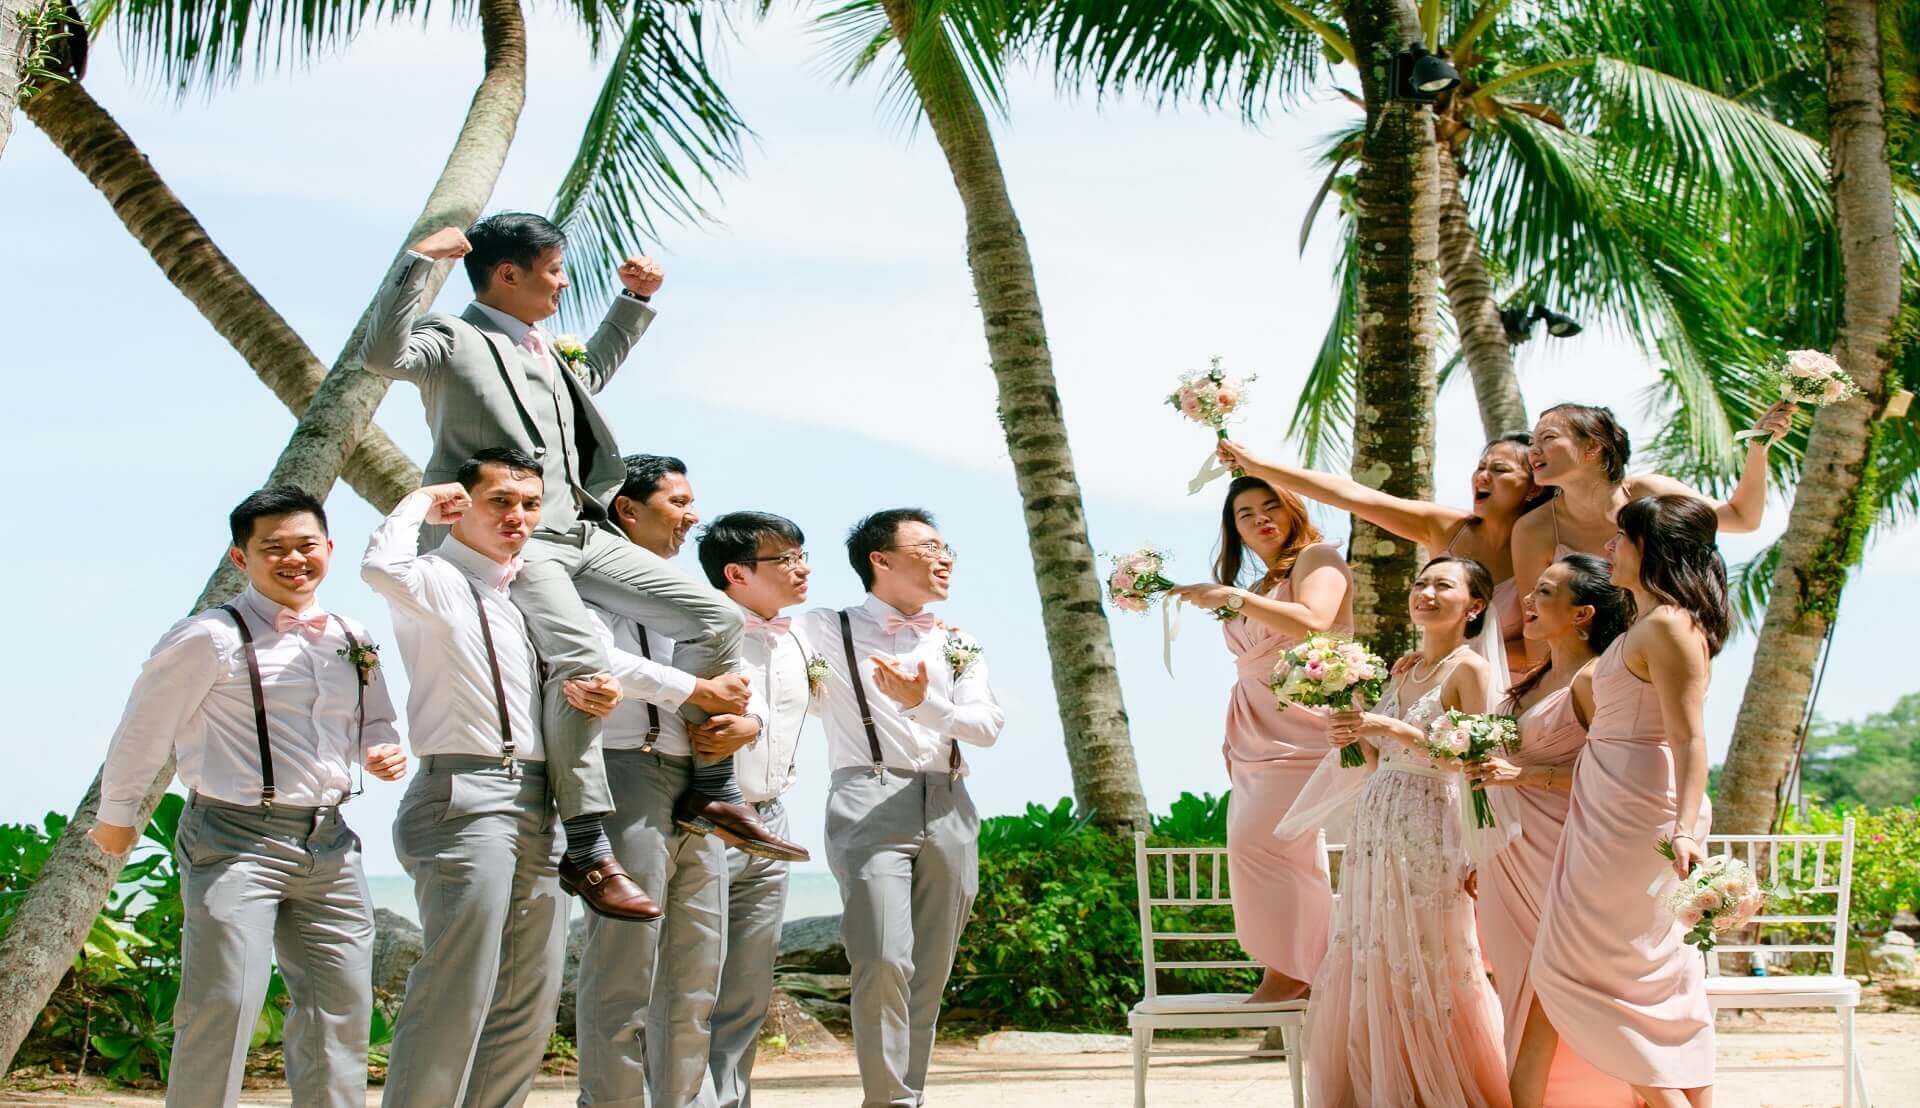 Sugar & Spice Events - Father walking daughter down the aisle wedding tradition at Rasa Sayang Resort wedding by the garden